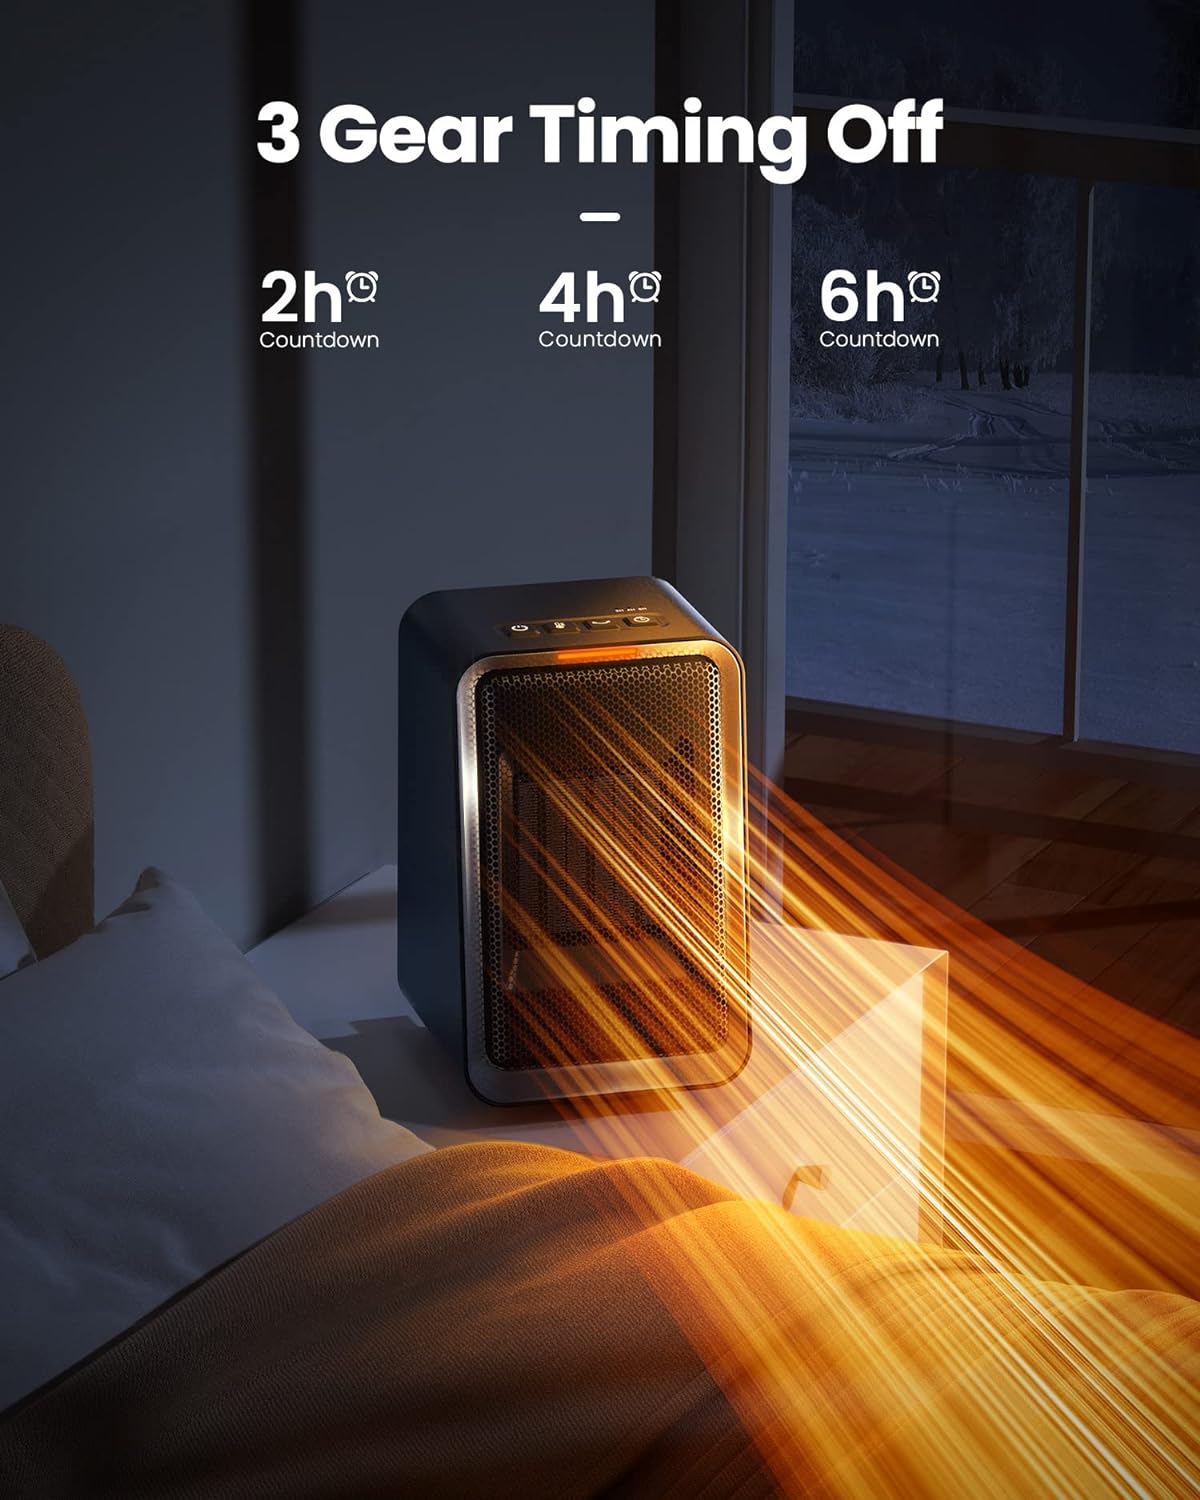 GAIATOP Space Heater for Indoor Use, Quiet 45° Oscillation 1000W Fast Heating Efficient Space Heaters, 2-6-8H Timing PTC Ceramic Heater, Tip-Over Overheating Protection Portable Heater for Home